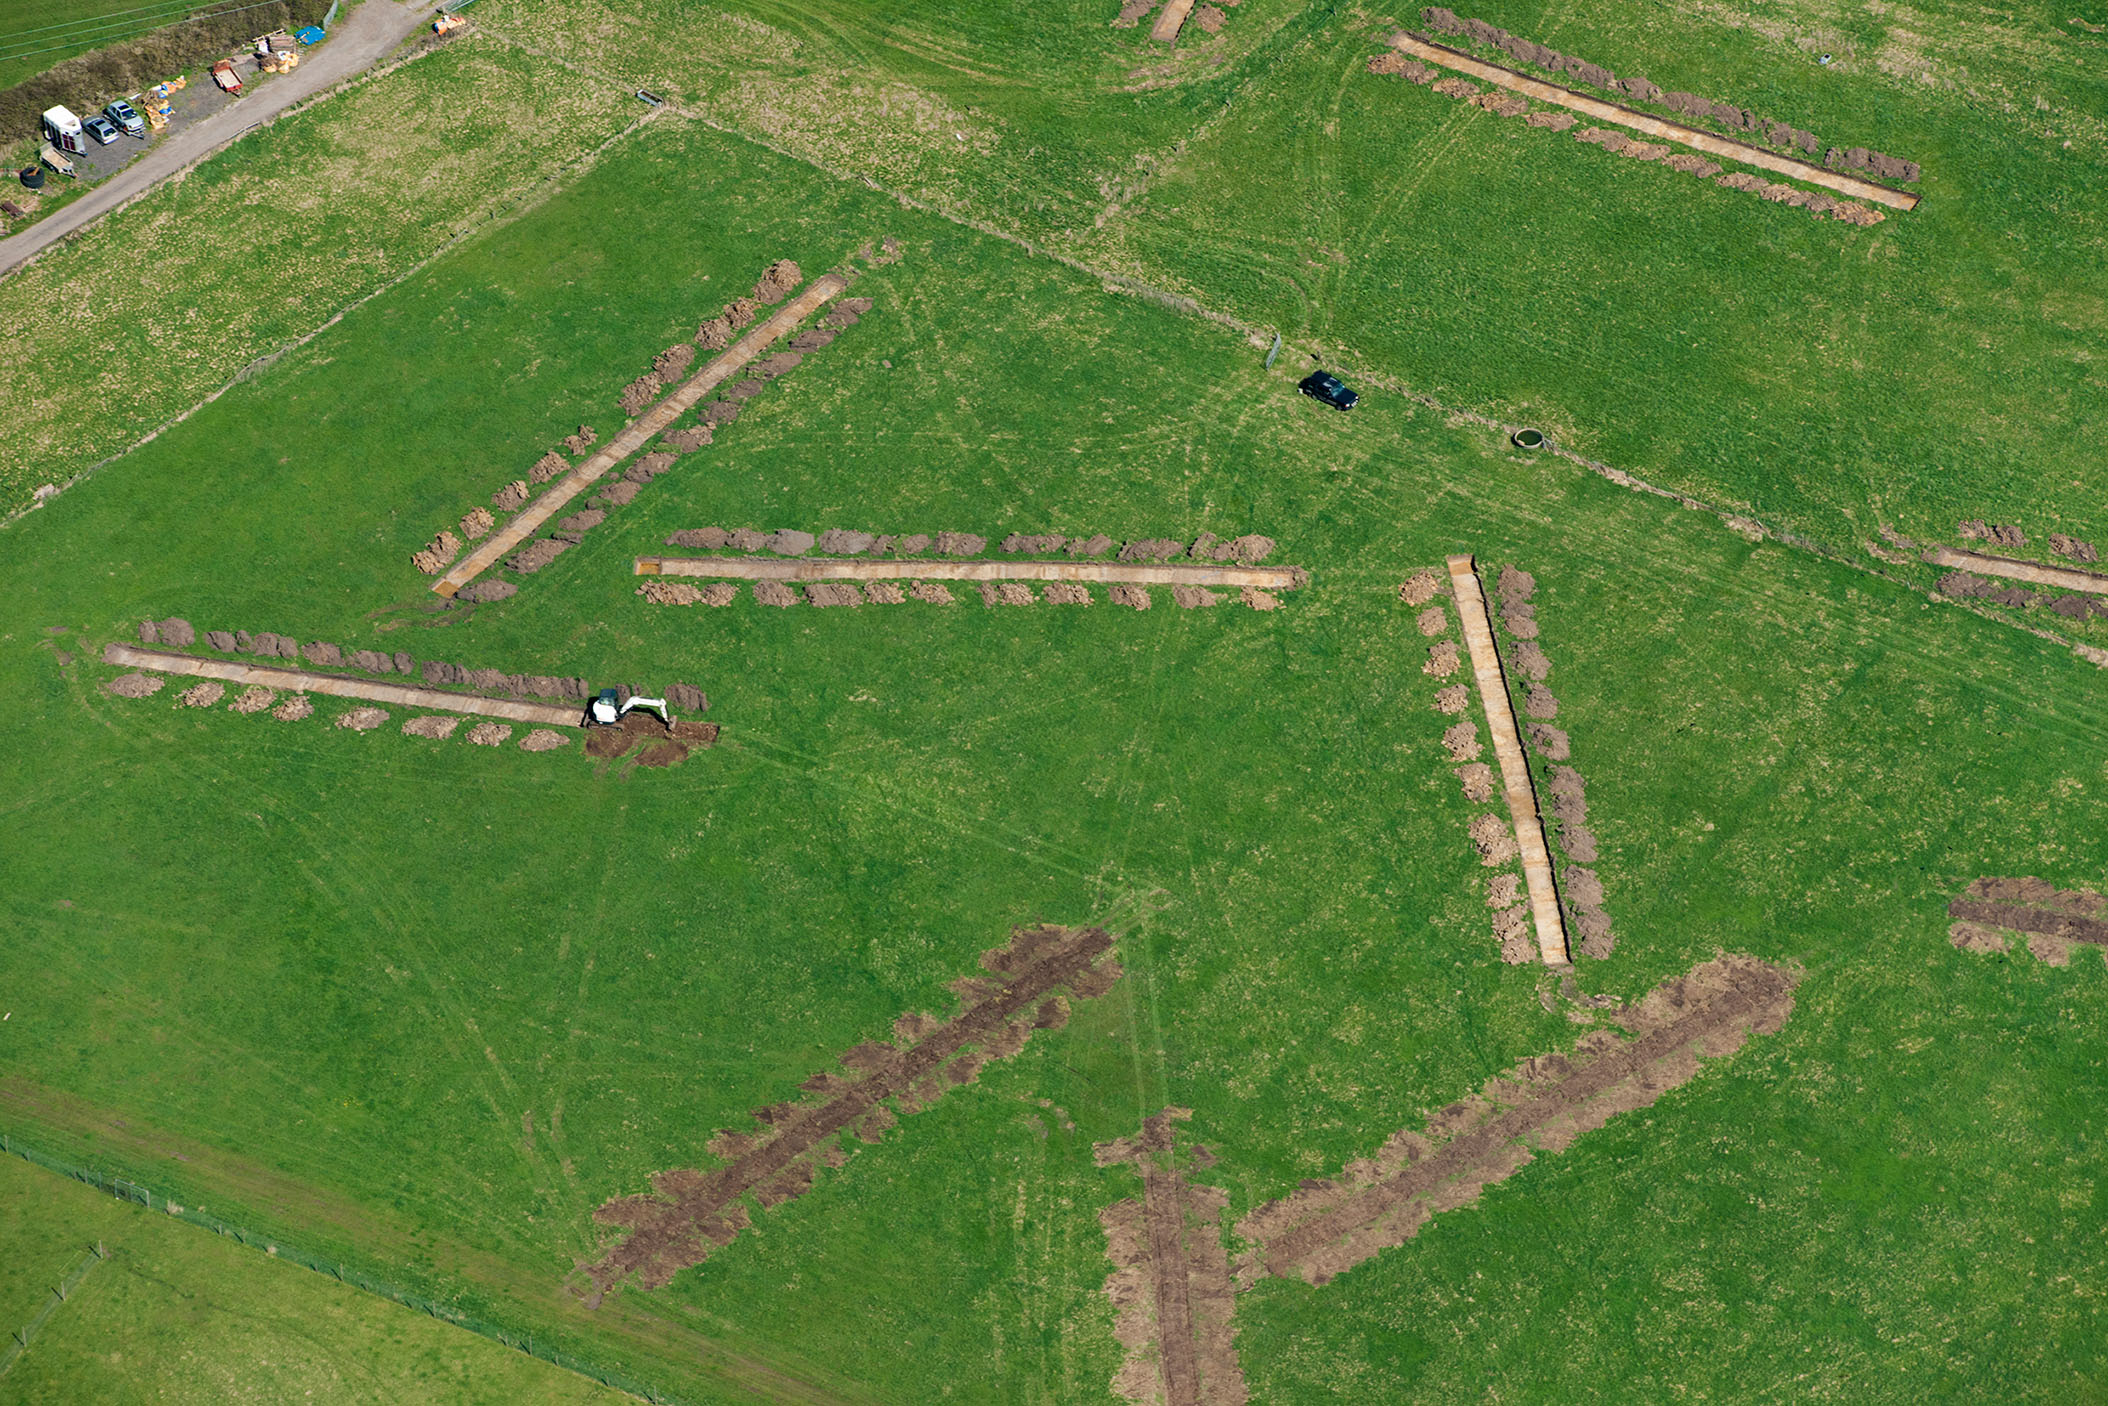 An aerial photograph of eight trial archaeological trenches in a green field.